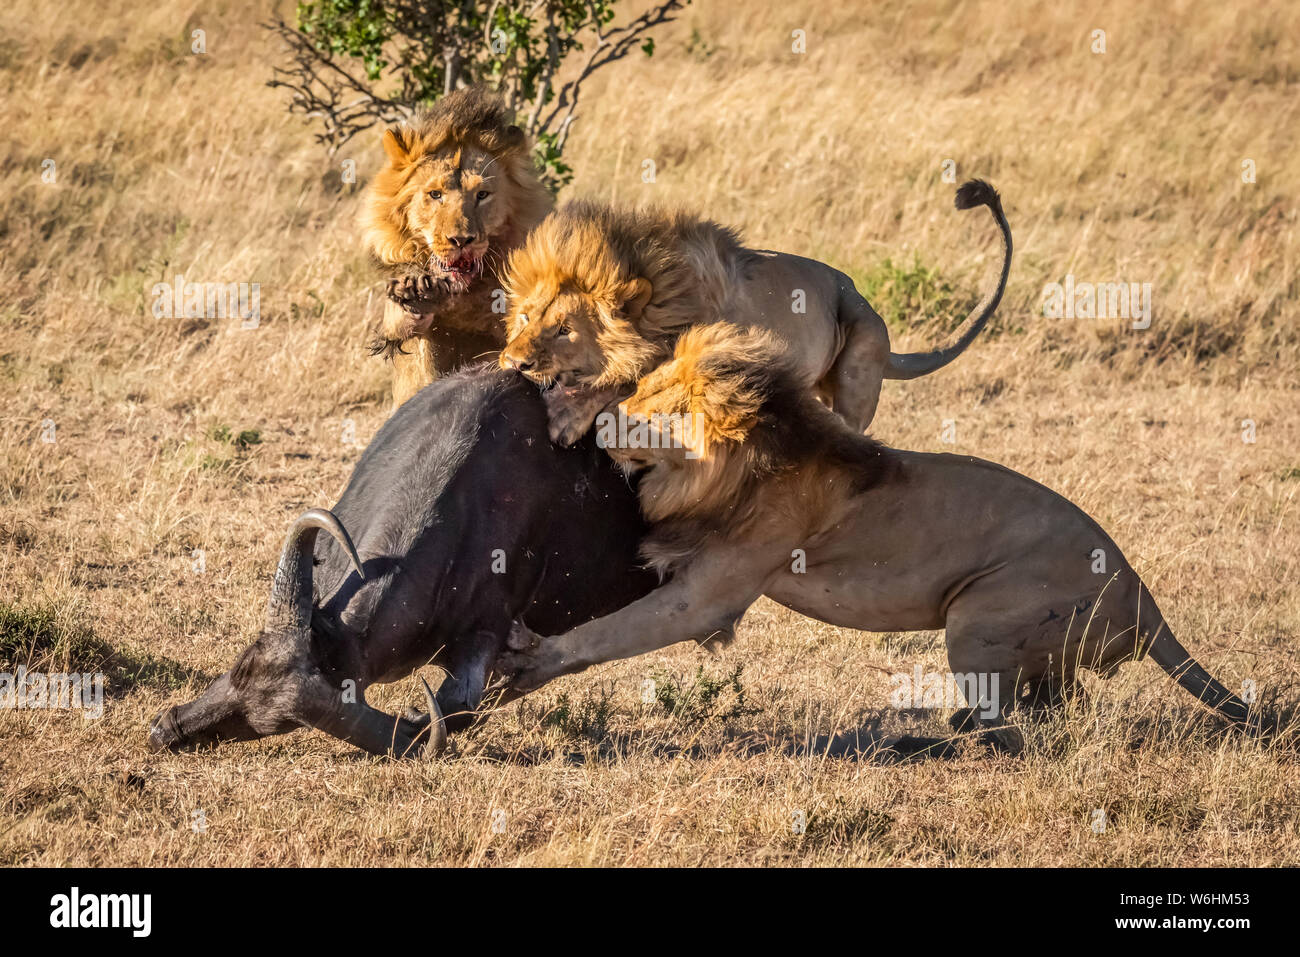 Lion Attack Buffalo High Resolution Stock Photography and Images - Alamy